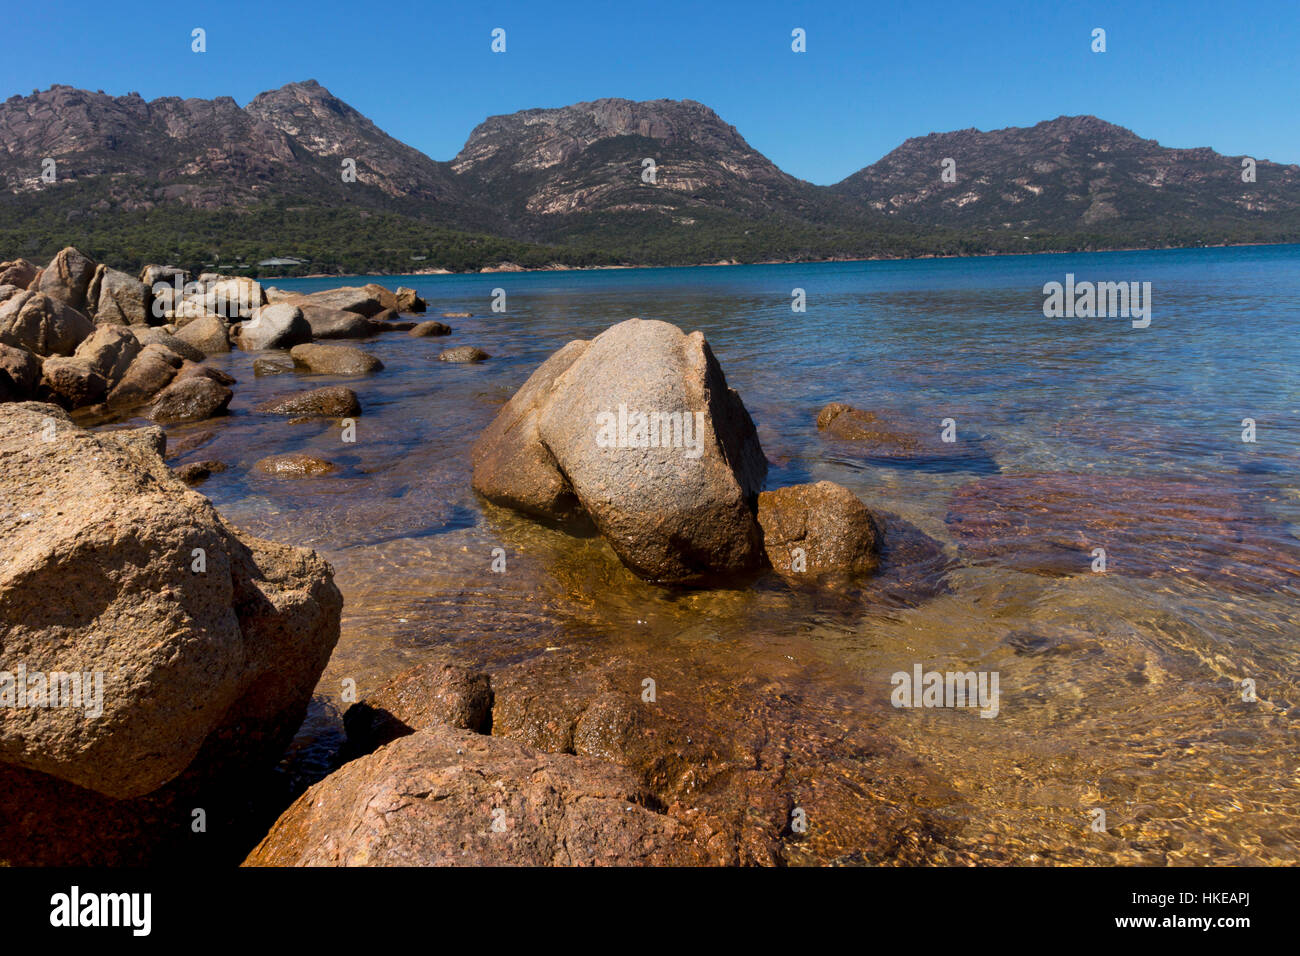 Boats moored in Coles Bay, Tasmania, Australia with the Hazard Mountains behind Stock Photo